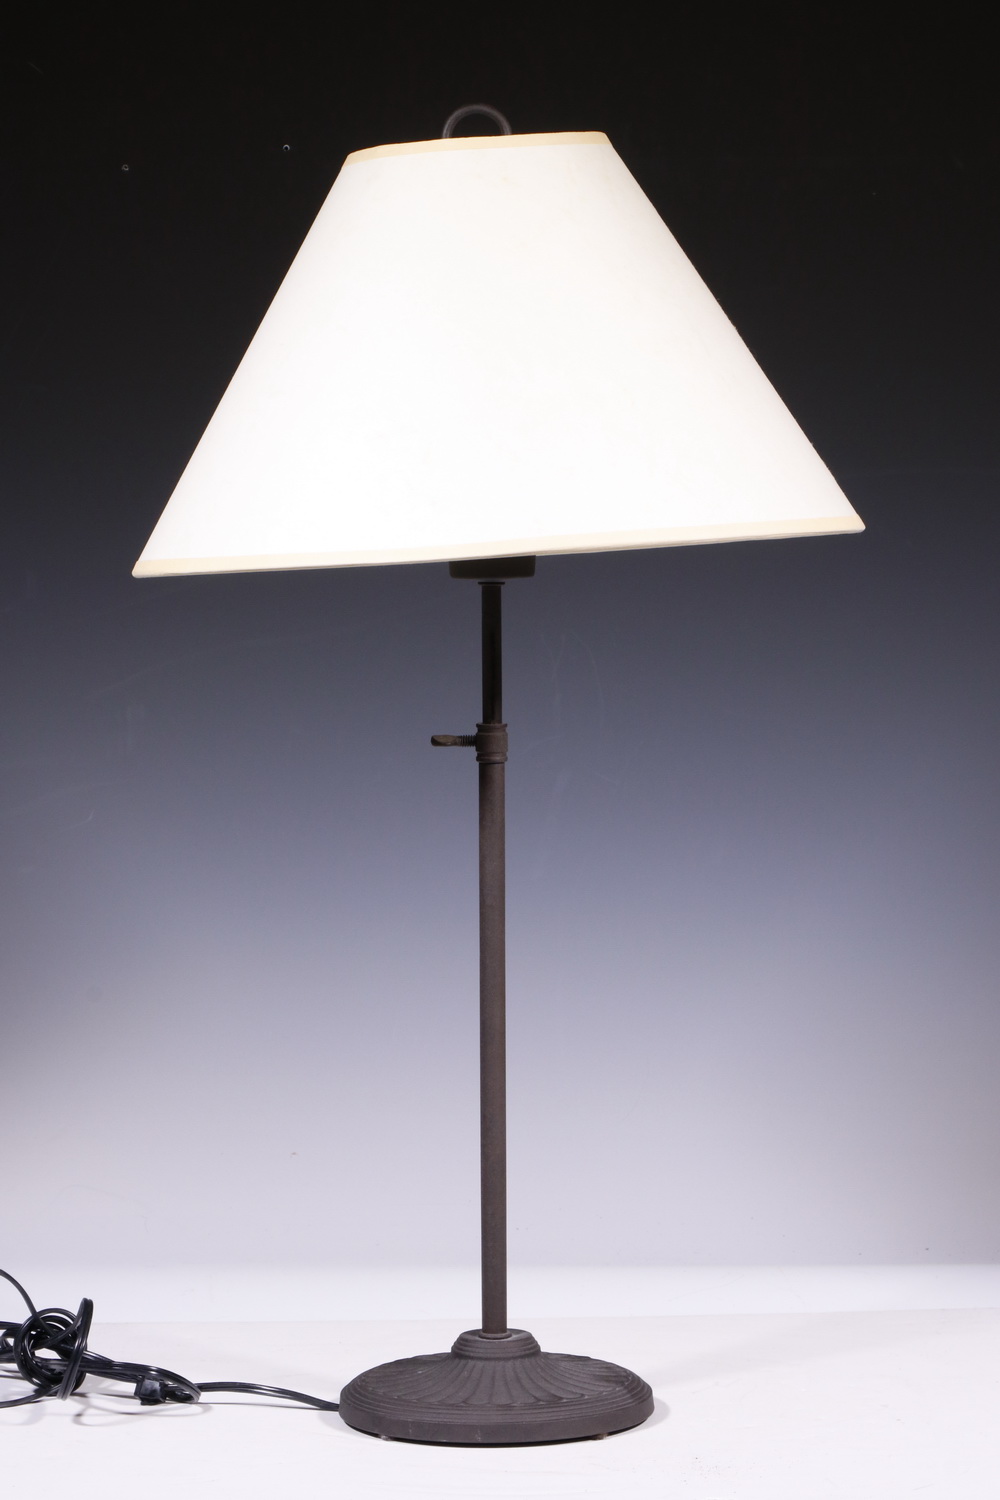 TABLE LAMP WITH PAPER SHADE Metal table